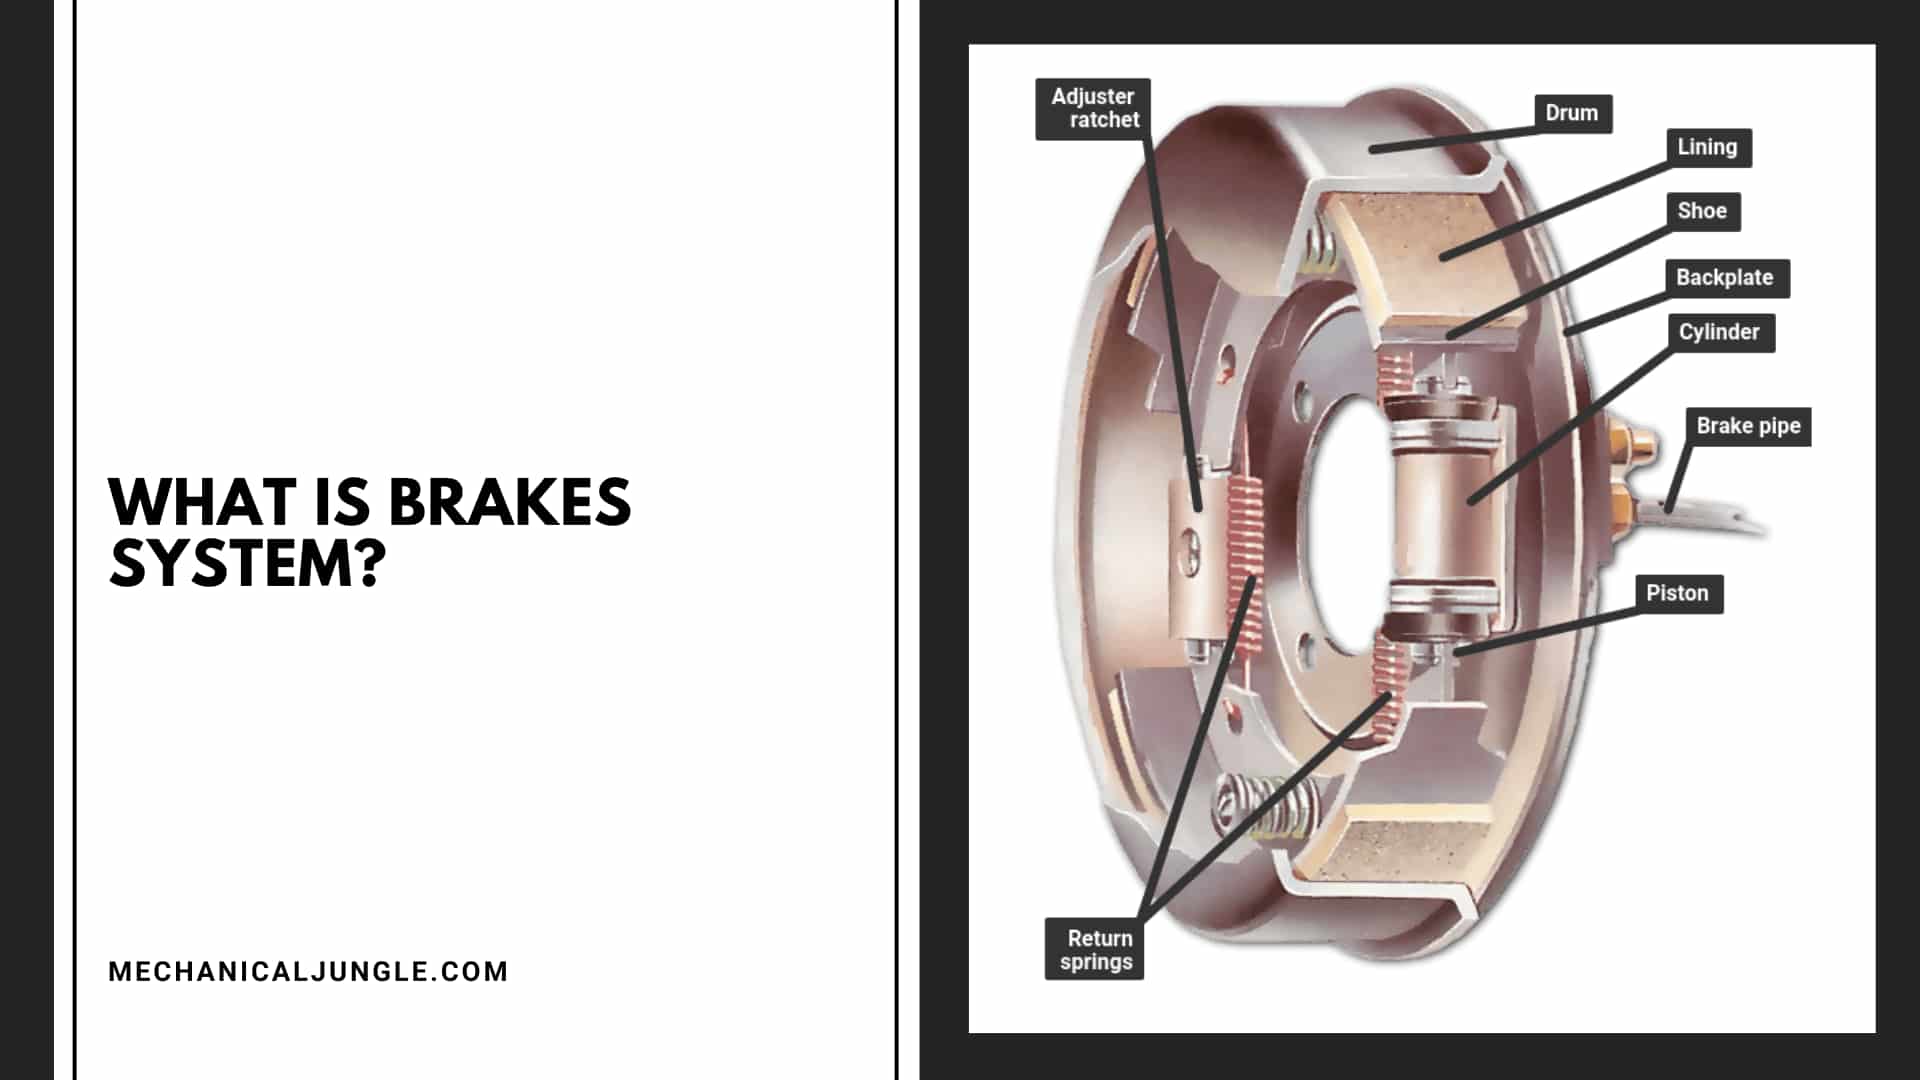 What Is Brakes System?